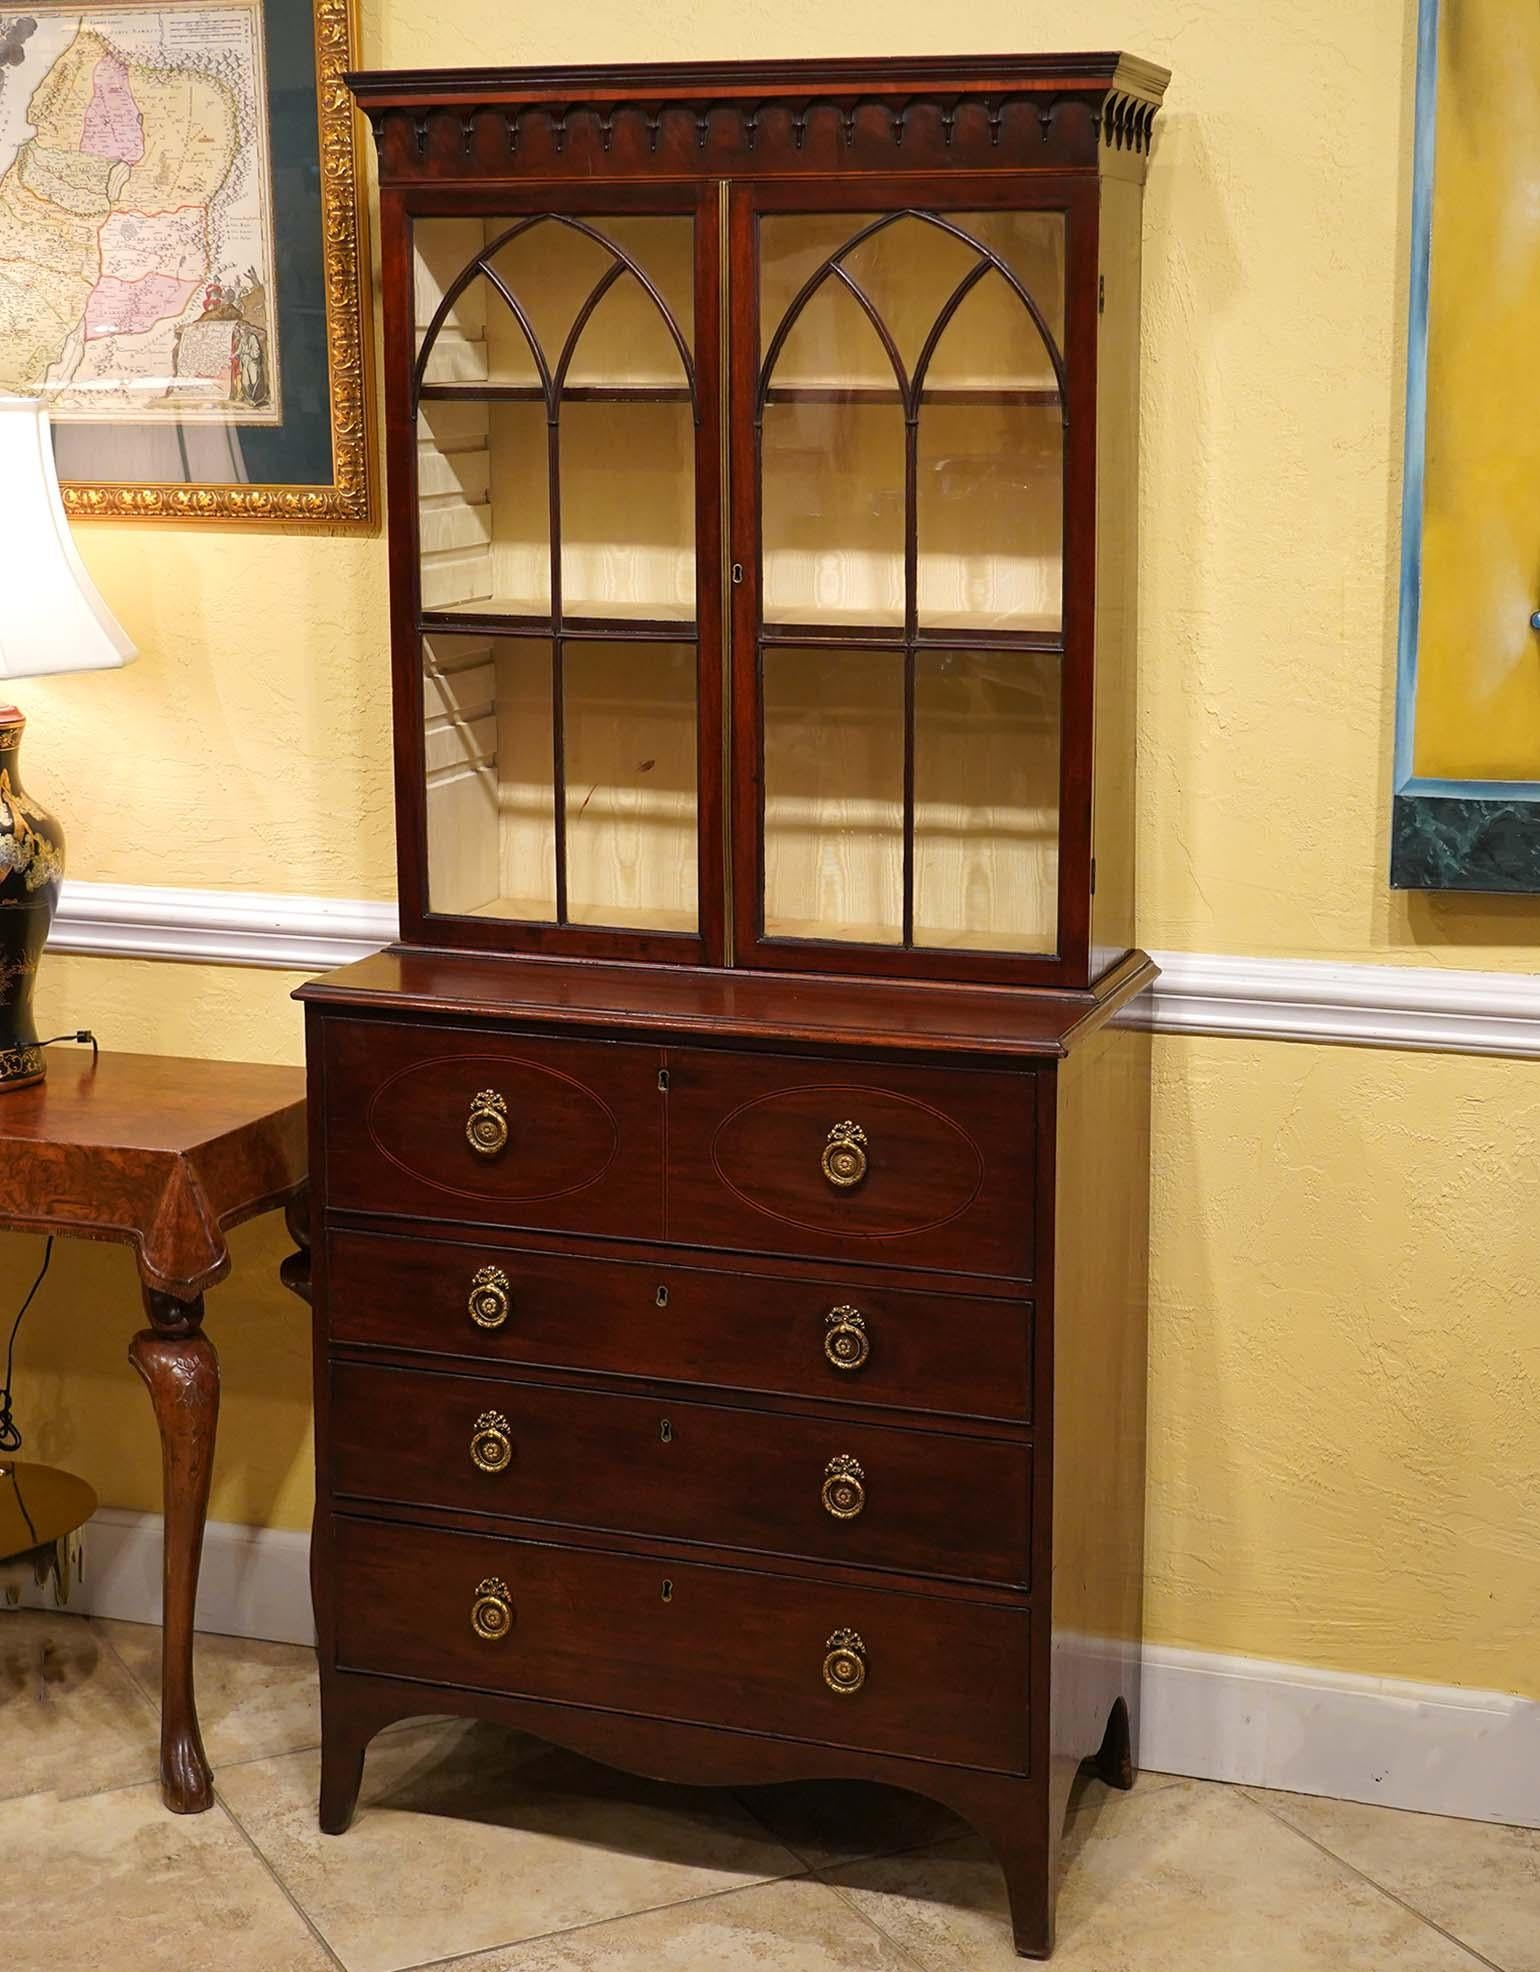 Of a very attractive small size this Georgian inlaid Mahogany Bookcase Secretary Desk dates to circa 1820 and features a bookcase with adjustable shelves and lined with moire silk. The upper drawer of the secretary desk can be pulled out revealing a